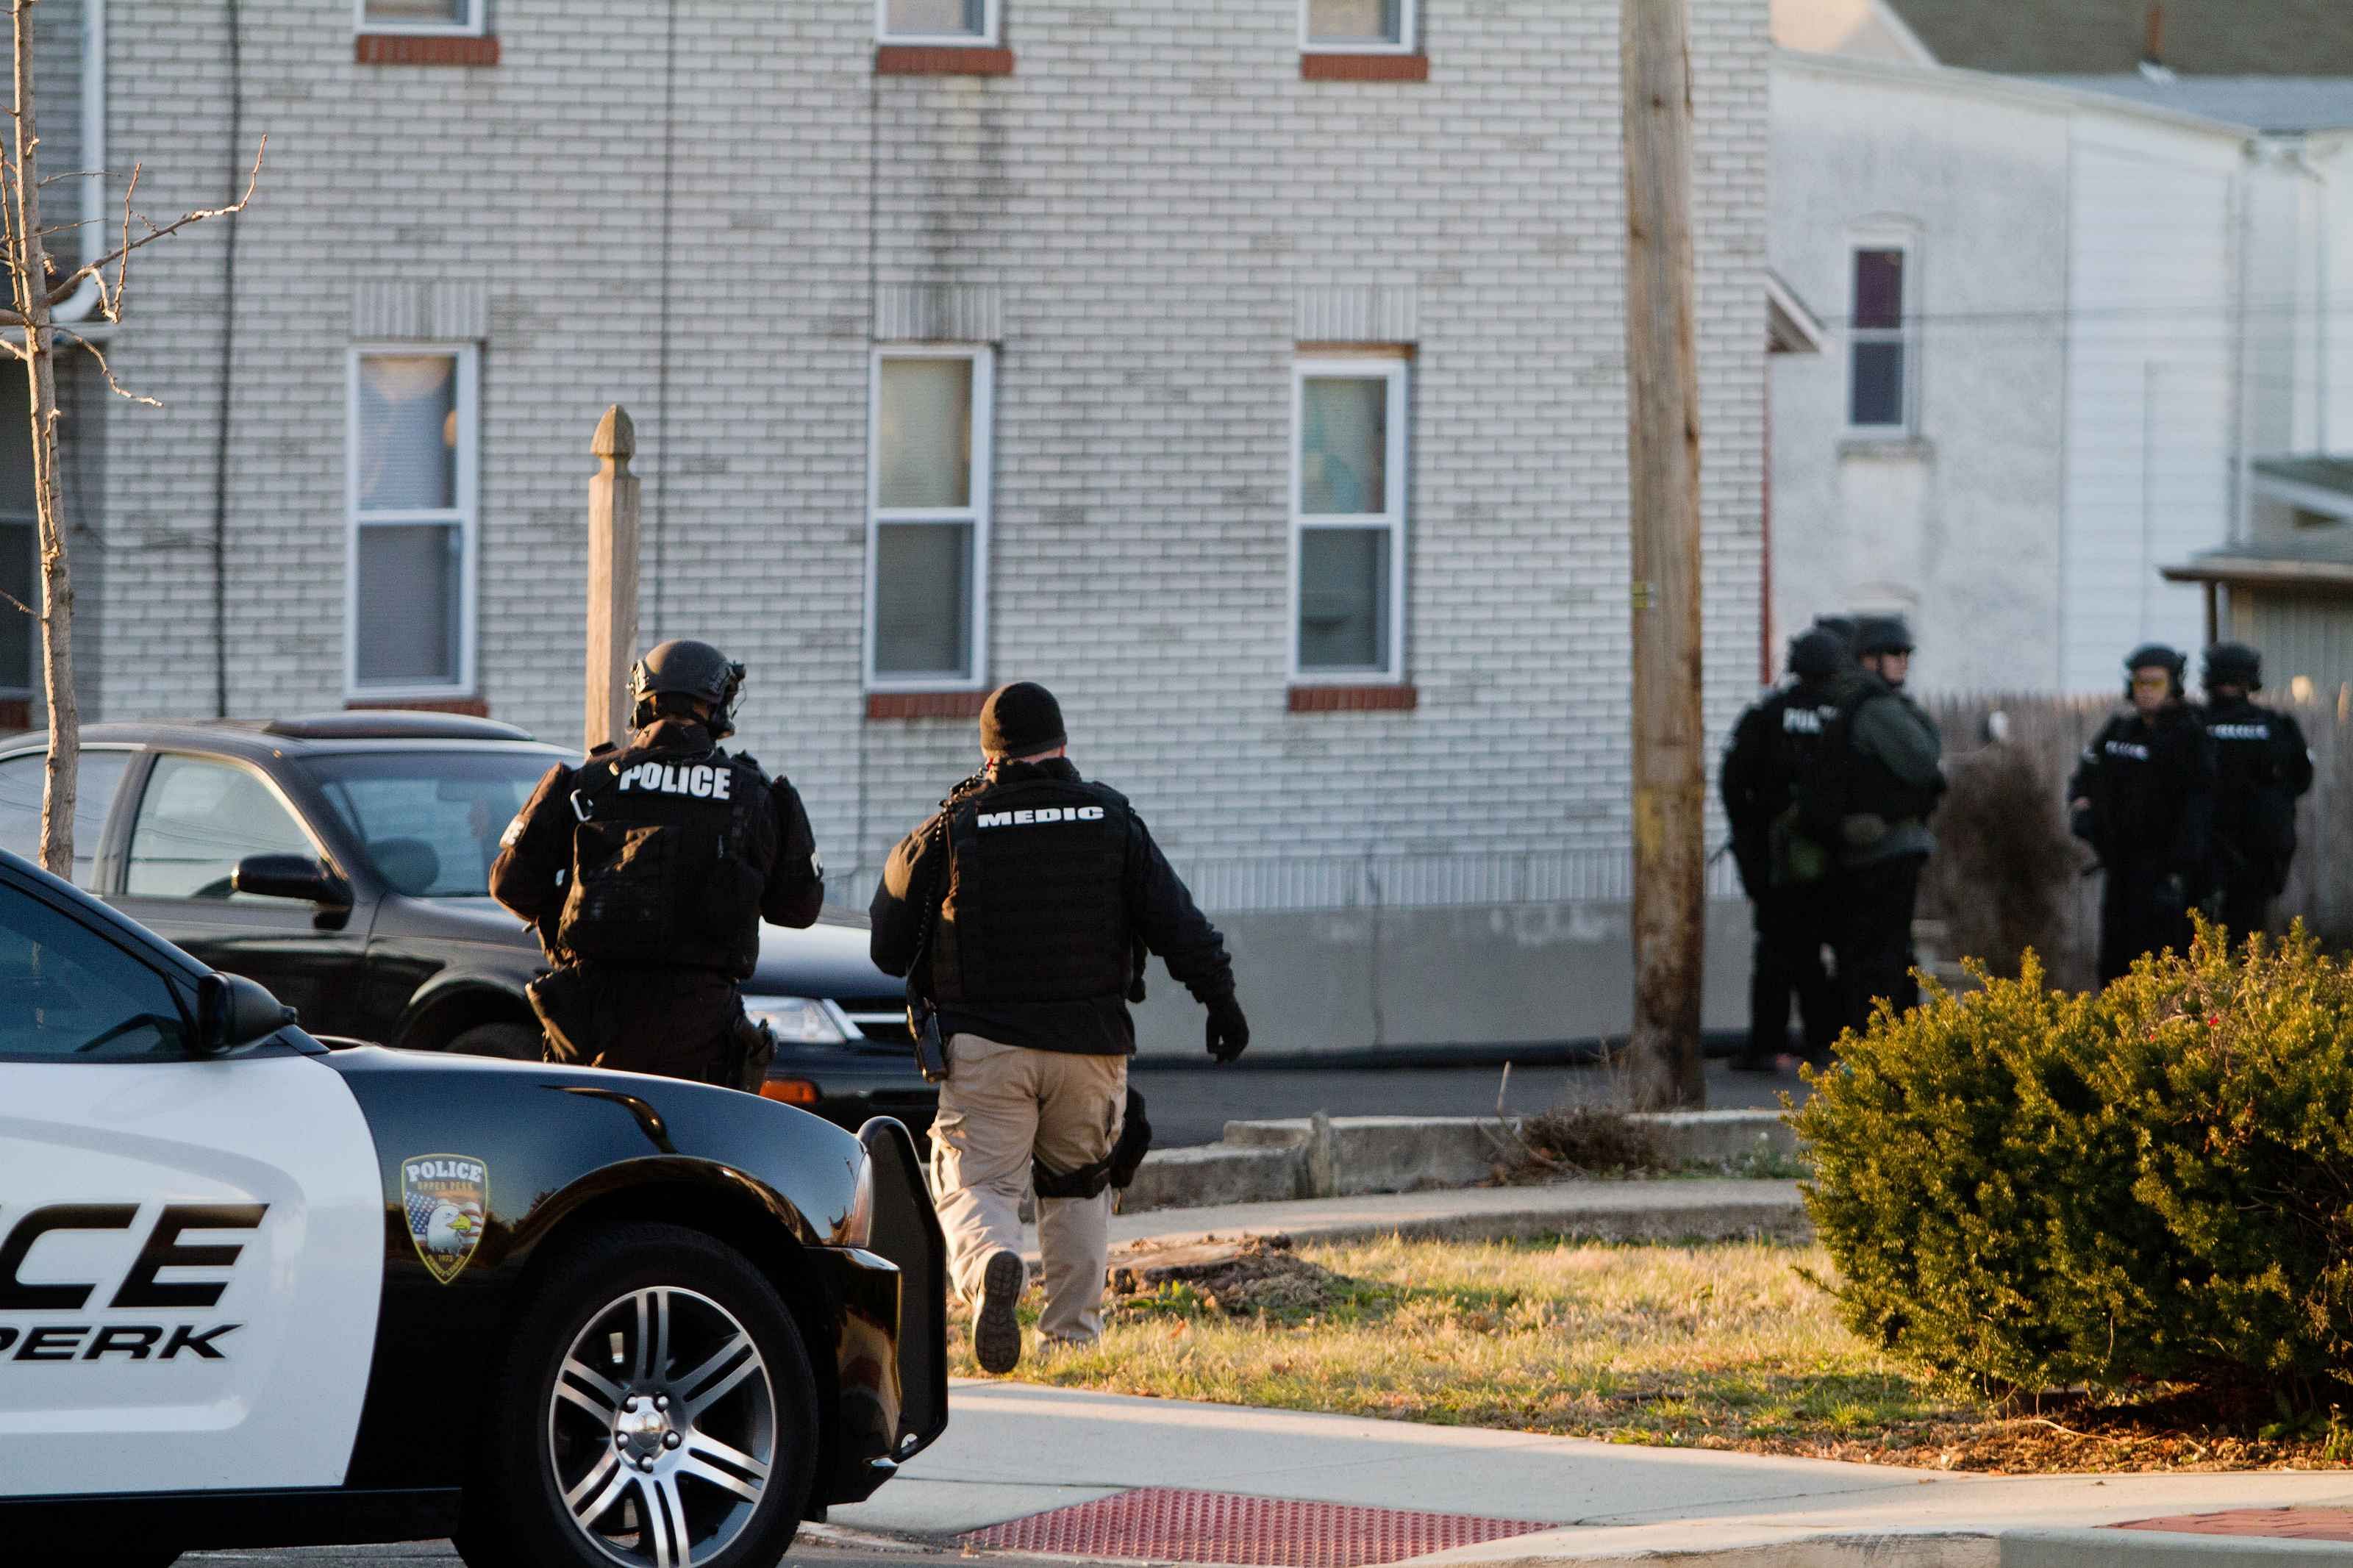 Police stand outside the house in which suspect Bradley Williams-Stone, 35, was believed to be hiding in Pennsburg, Pennsylvania, December 15, 2014. Photo: Reuters